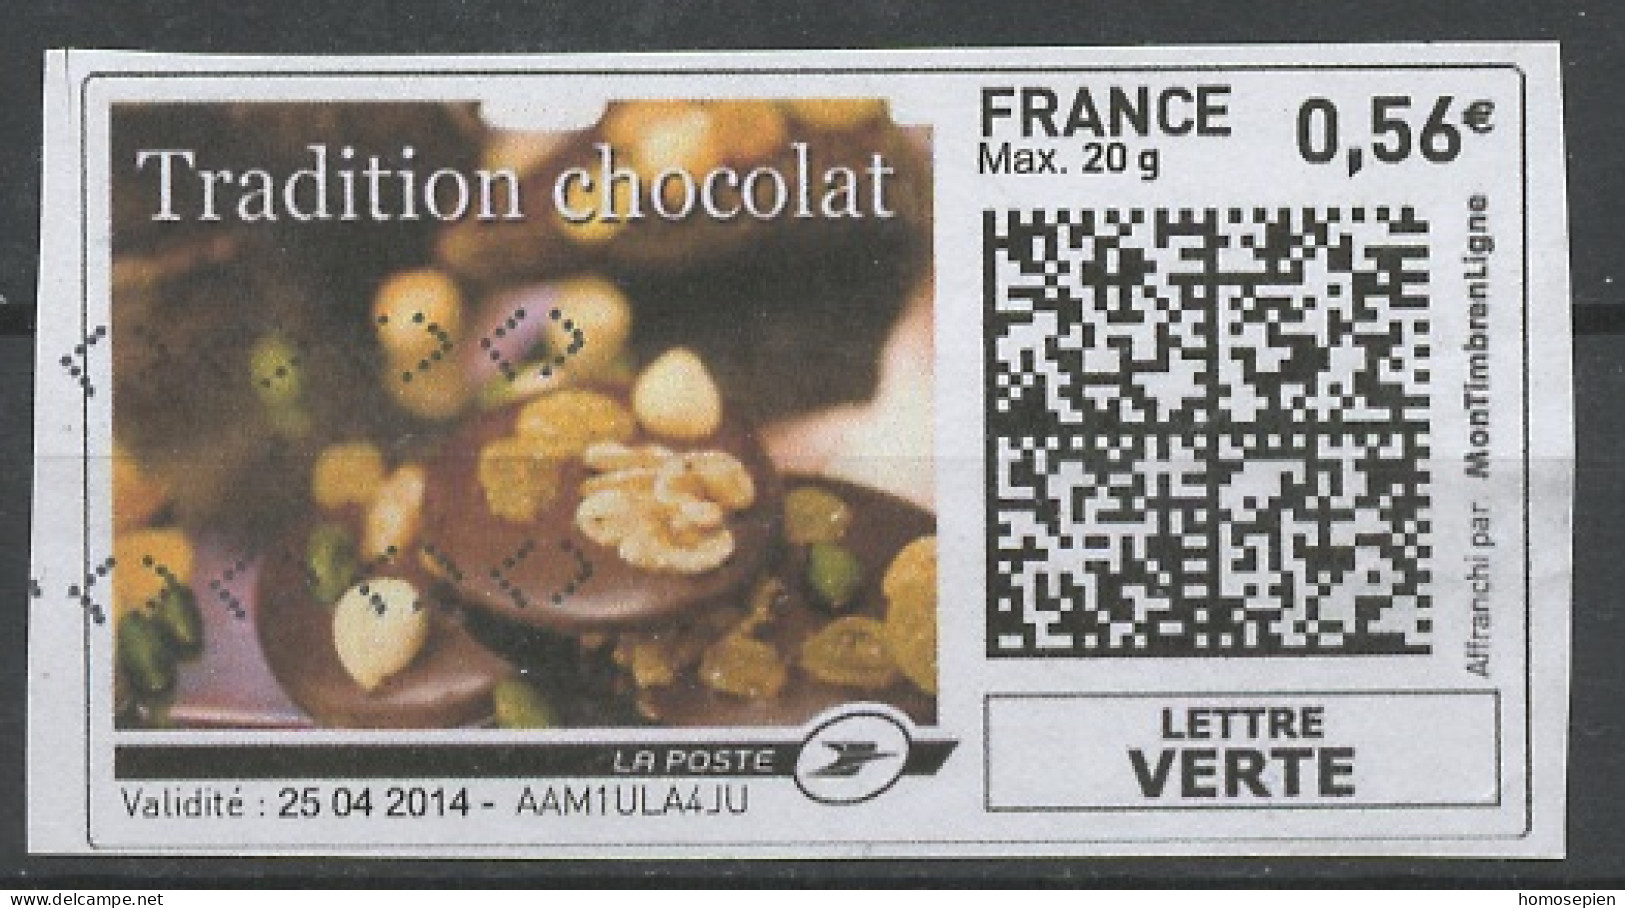 France - Frankreich Timbre Personnalisé Y&T N°MTEL LV20-03-0,56€  - Michel N°BS(?) (o) - Tradition Chocolat - Printable Stamps (Montimbrenligne)